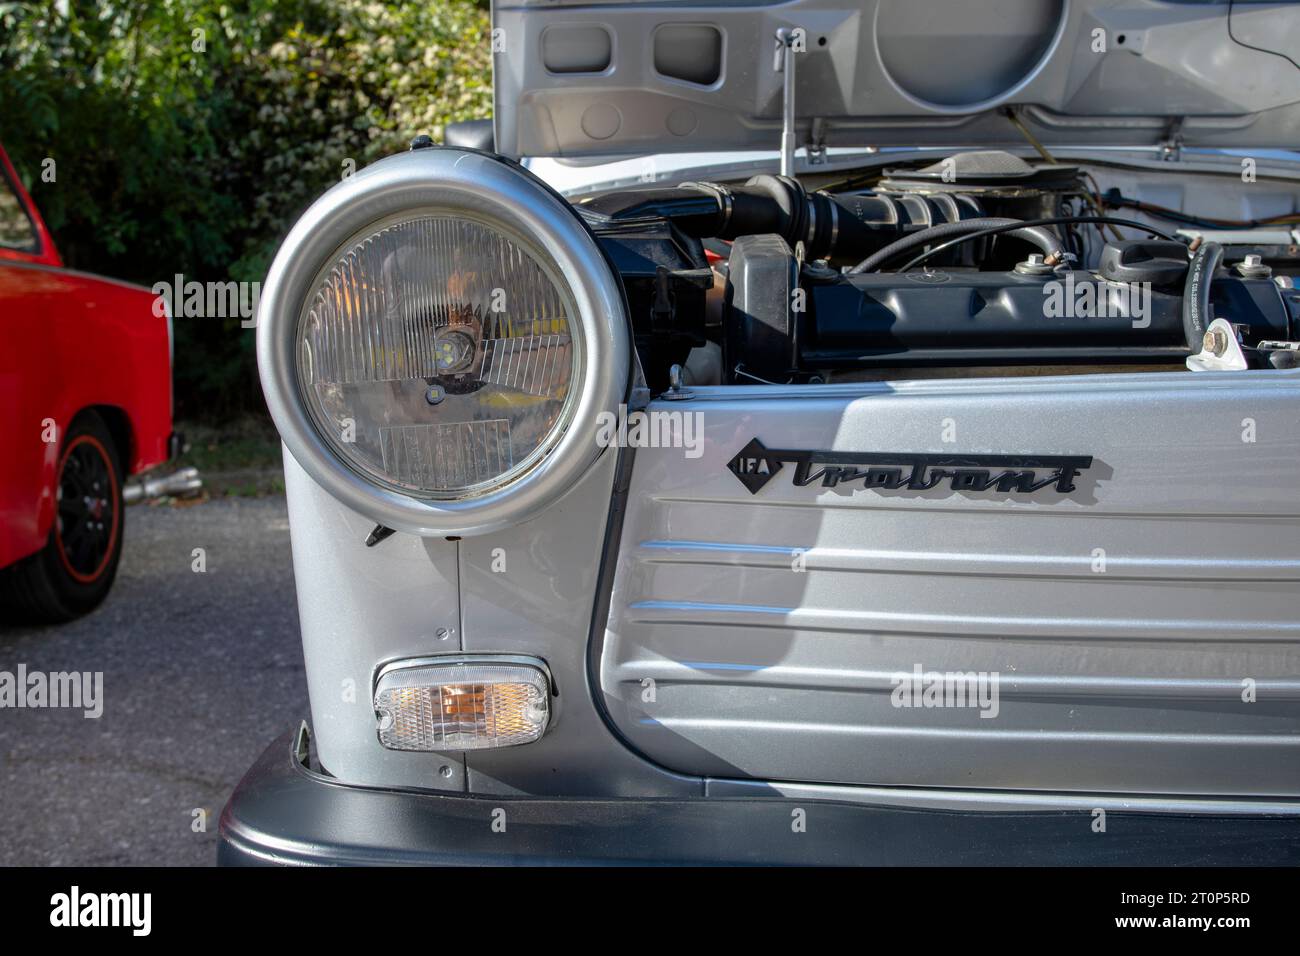 Sofia, Bulgaria - October 08, 2023: Autumn vintage bazaar in Sofia of old or vintage cars, spare parts, socialist and western auto literature, Trabant Stock Photo